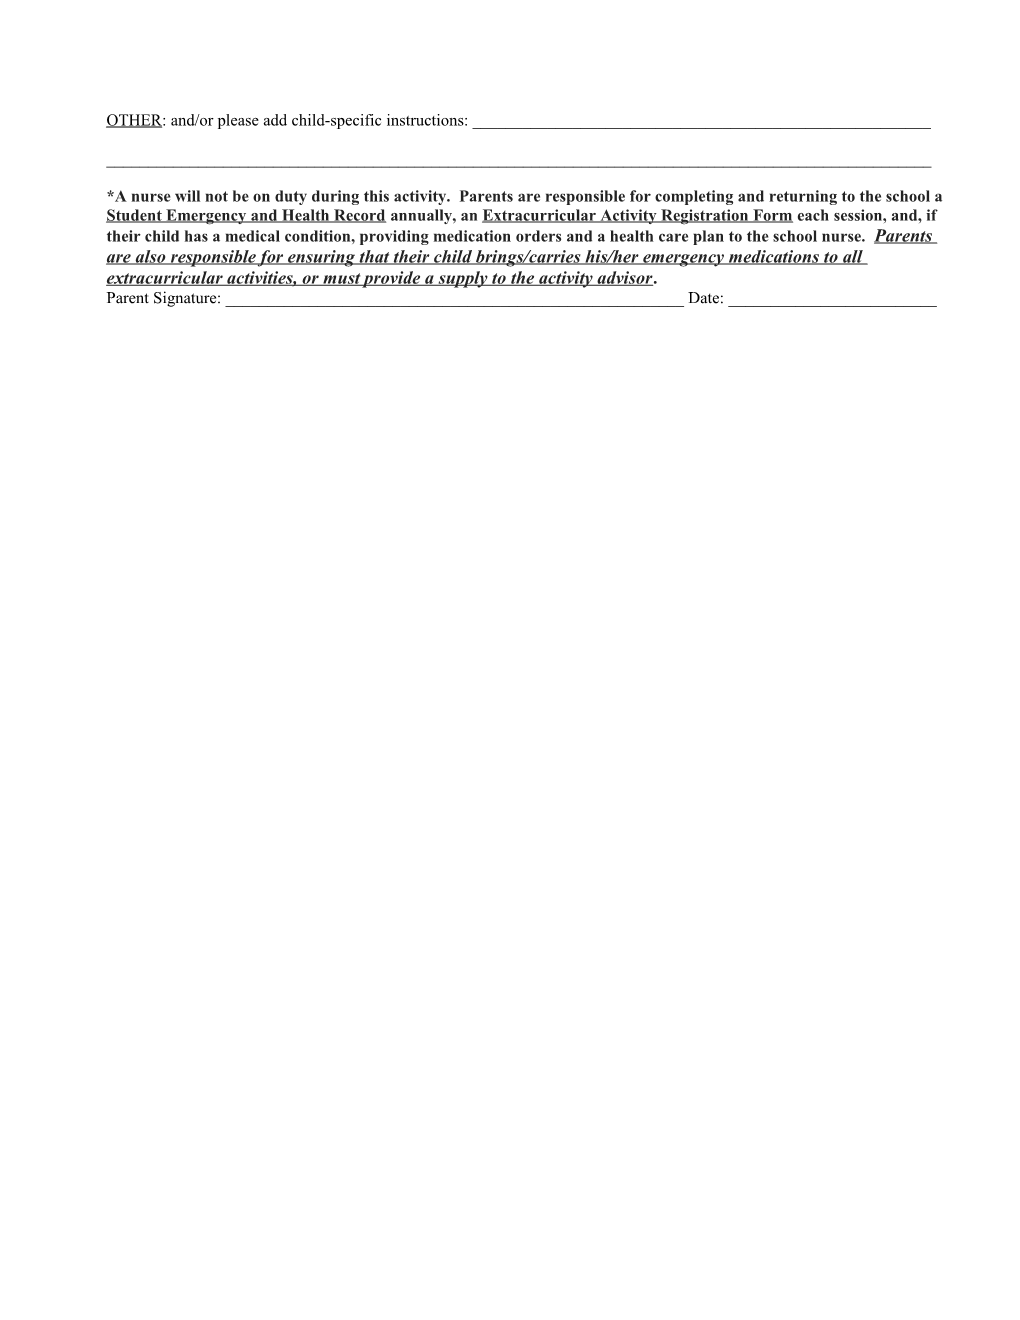 Extracurricular Activity Registration Form